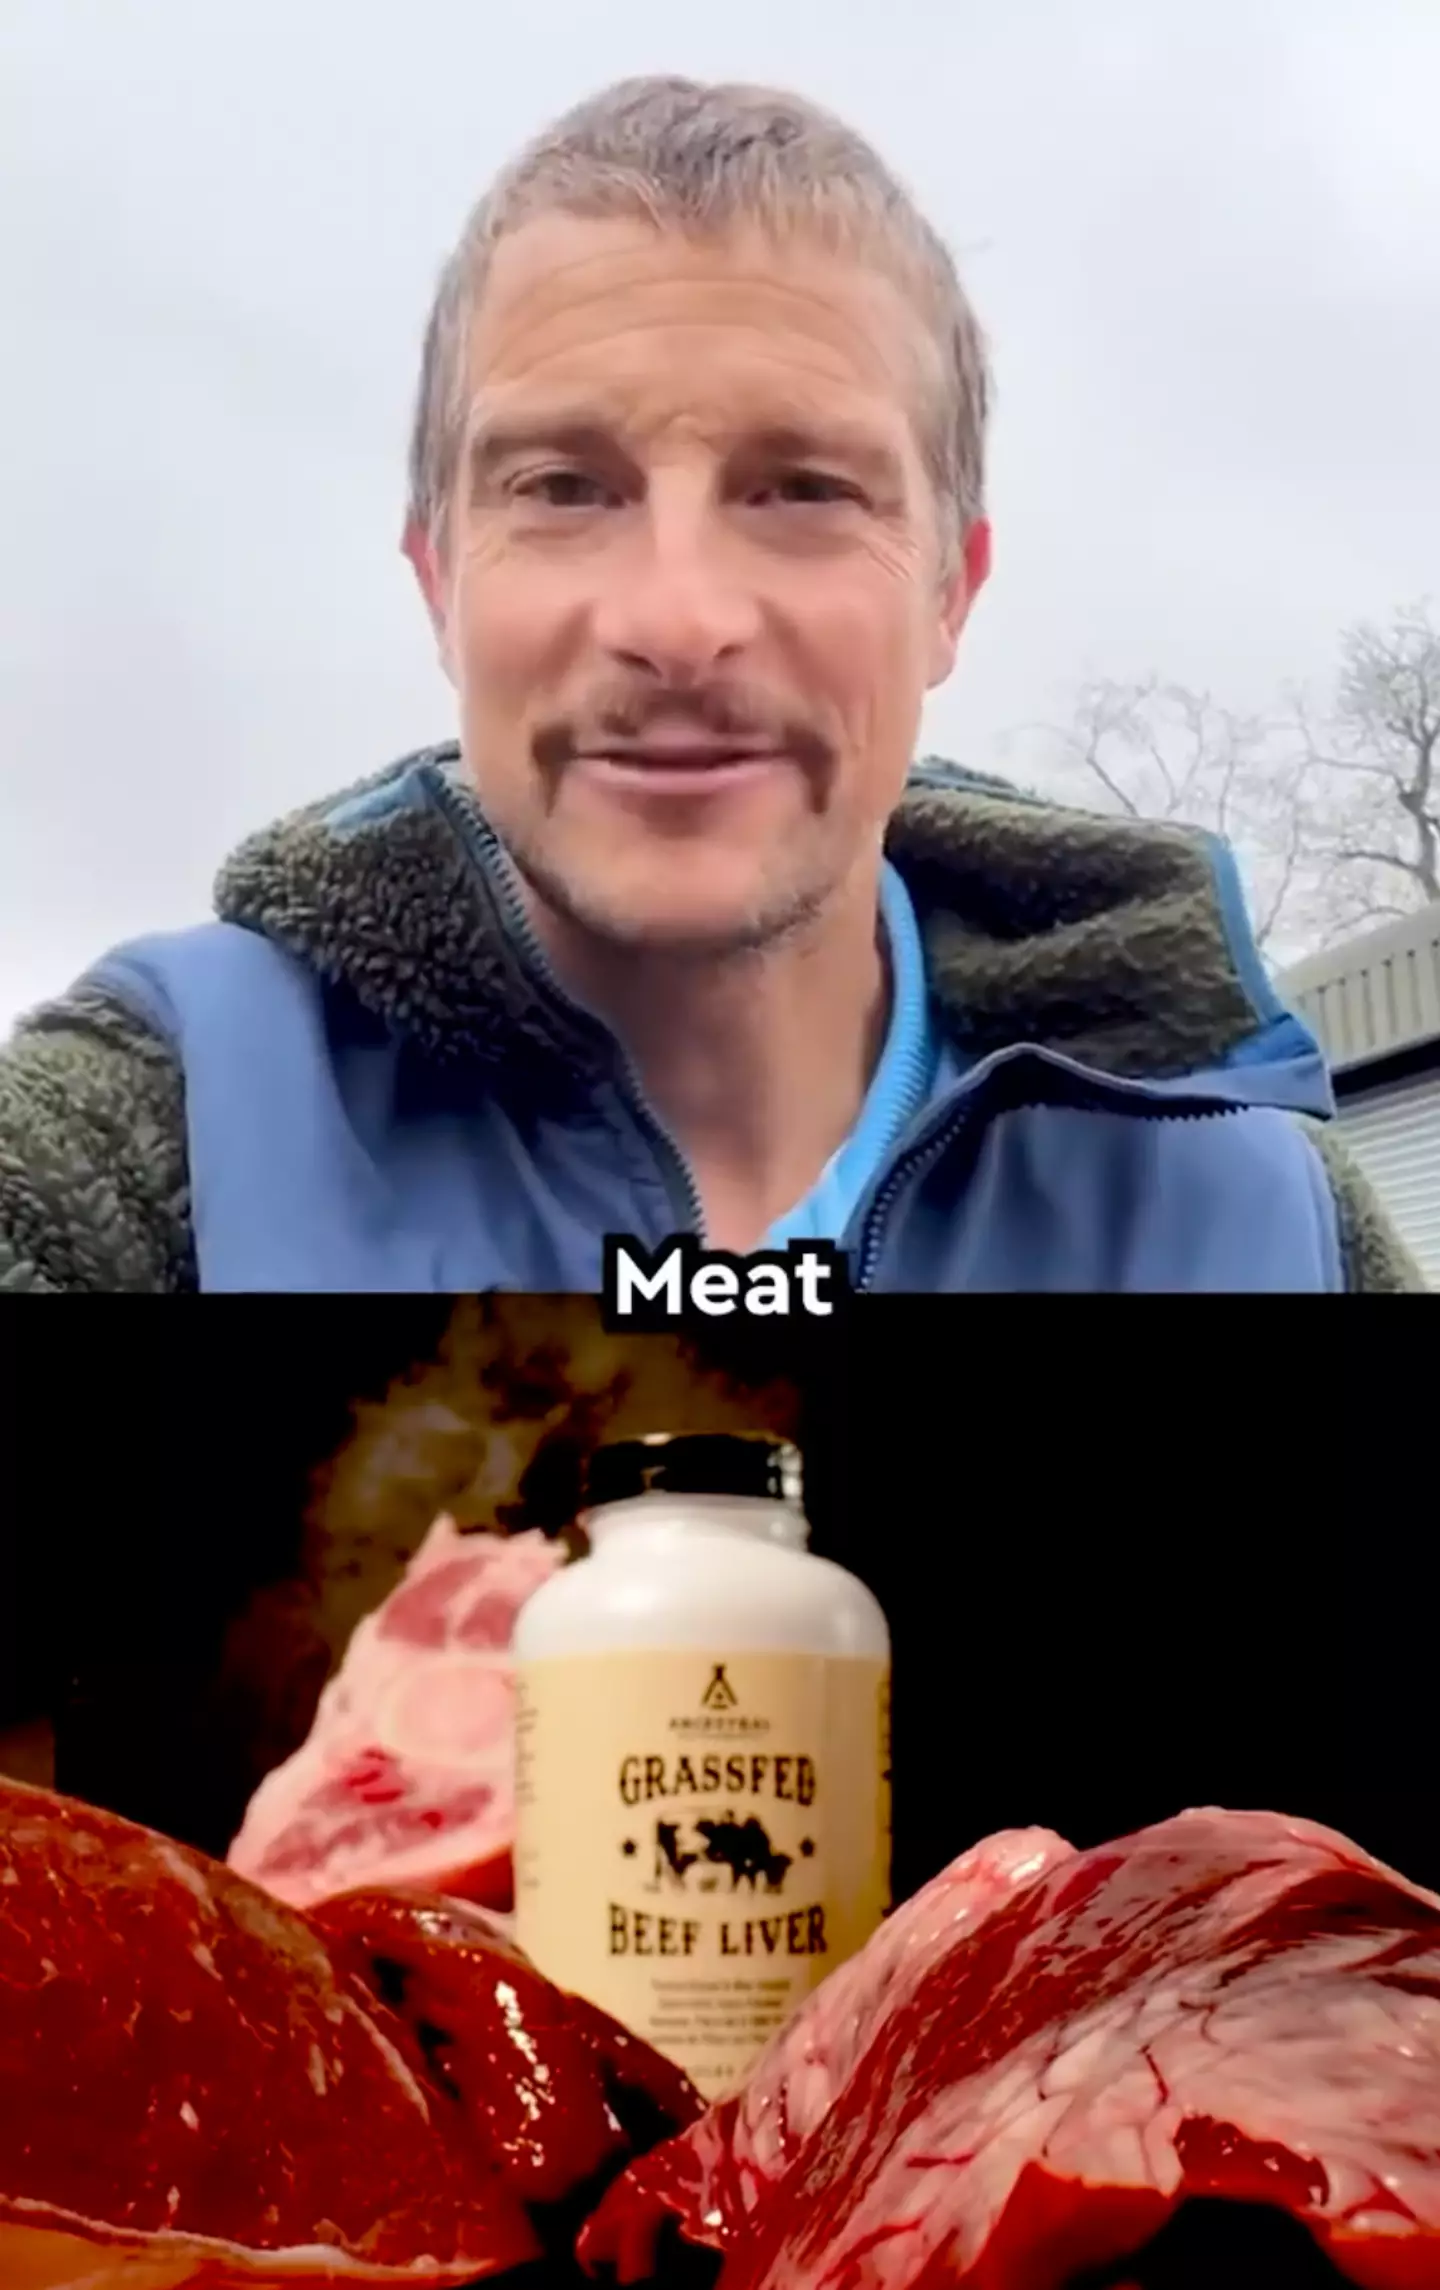 Bear Grylls now eats a seriously large amount of meat.